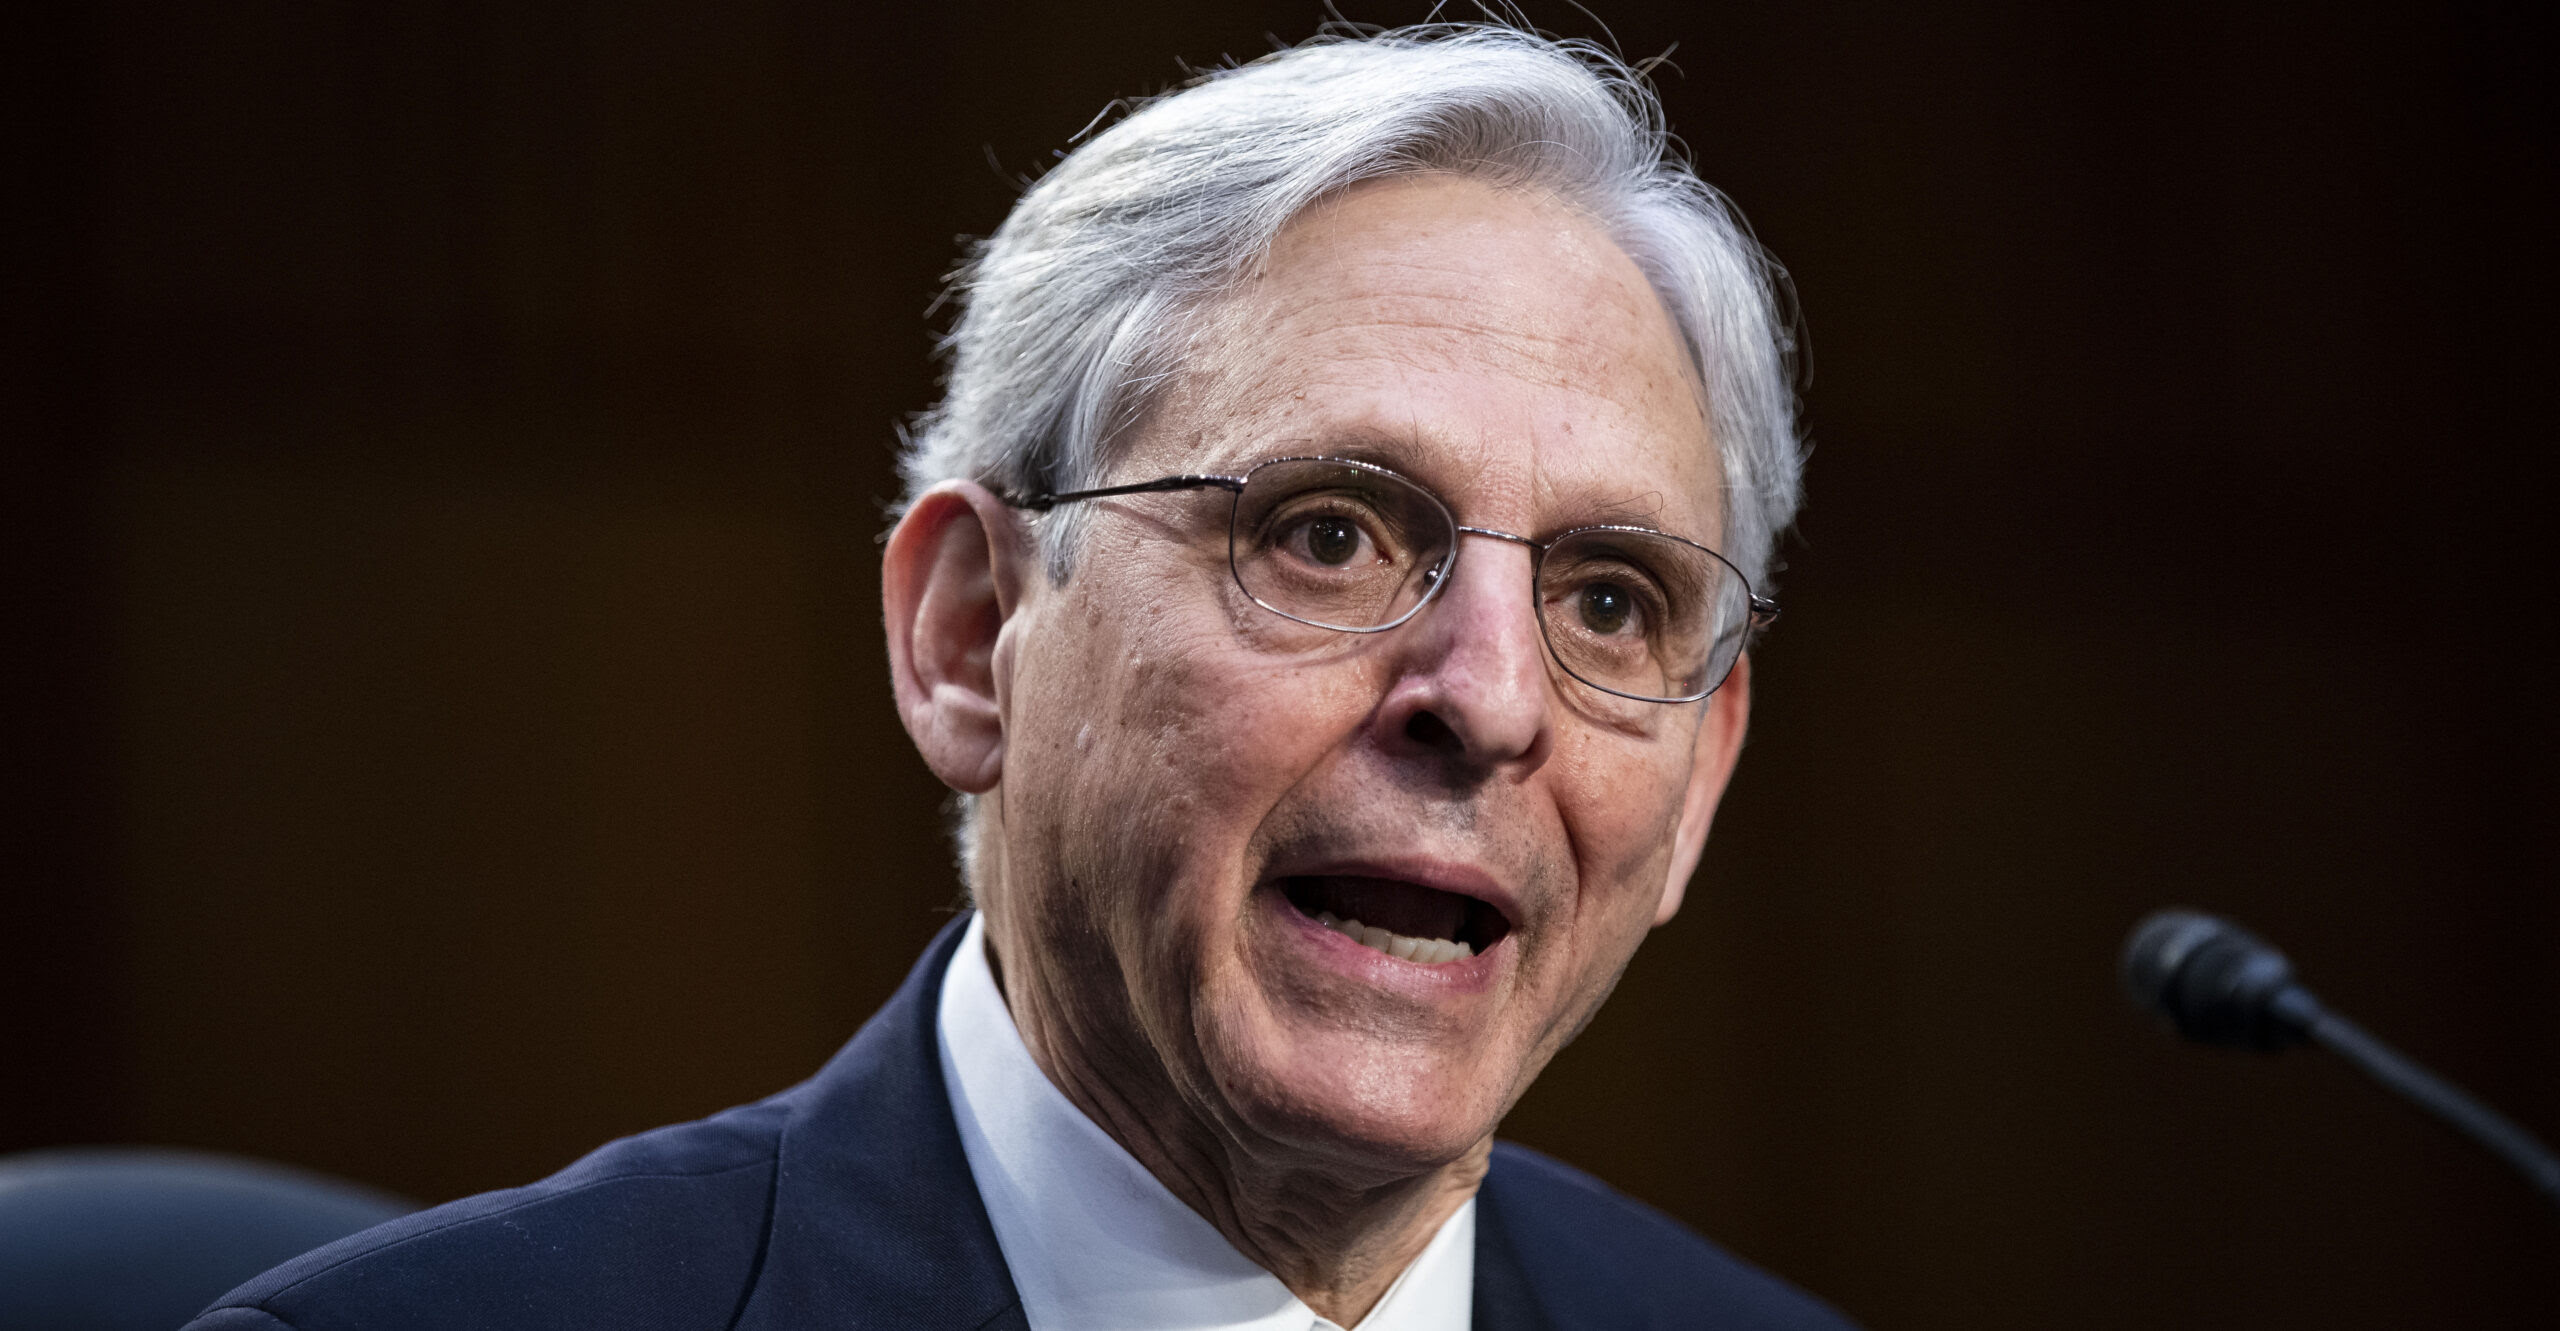 7 Takeaways as Merrick Garland Gets Hearing for Attorney General